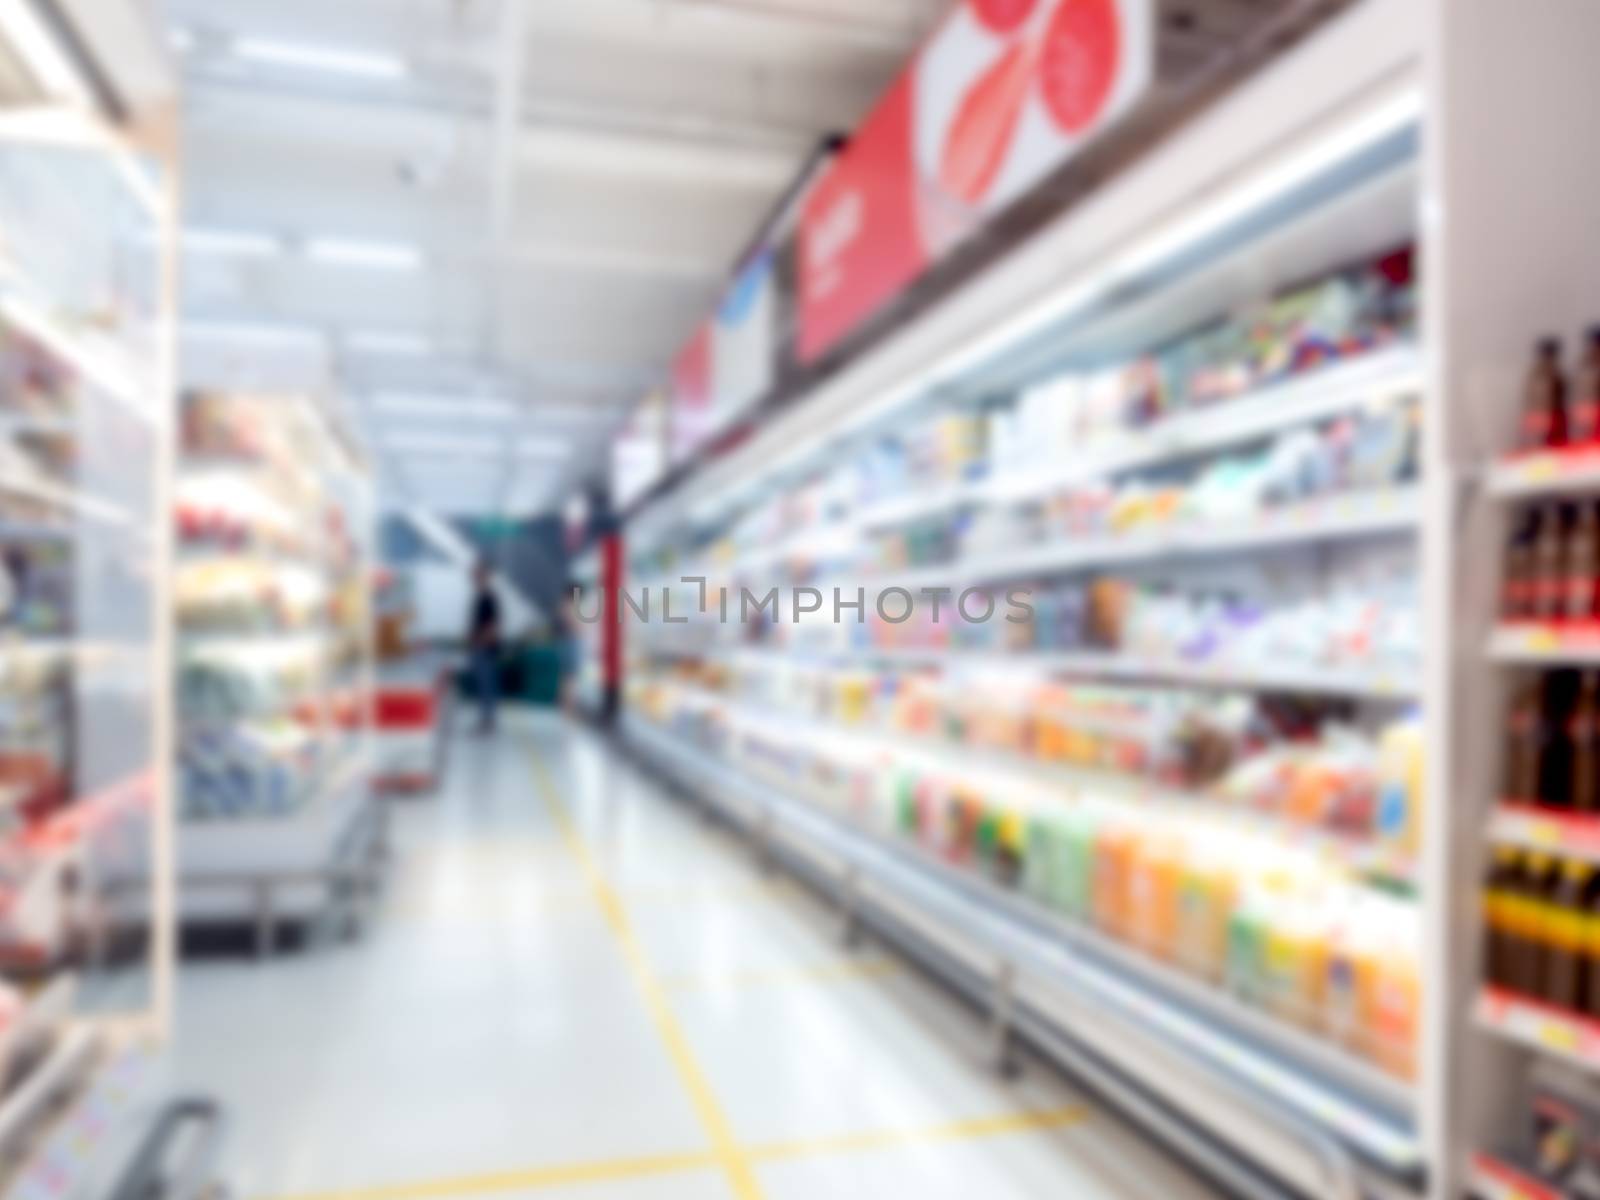 Supermarket blur background. Blurred interior view with walkway between cold drink beverage product shelves in shopping mall.